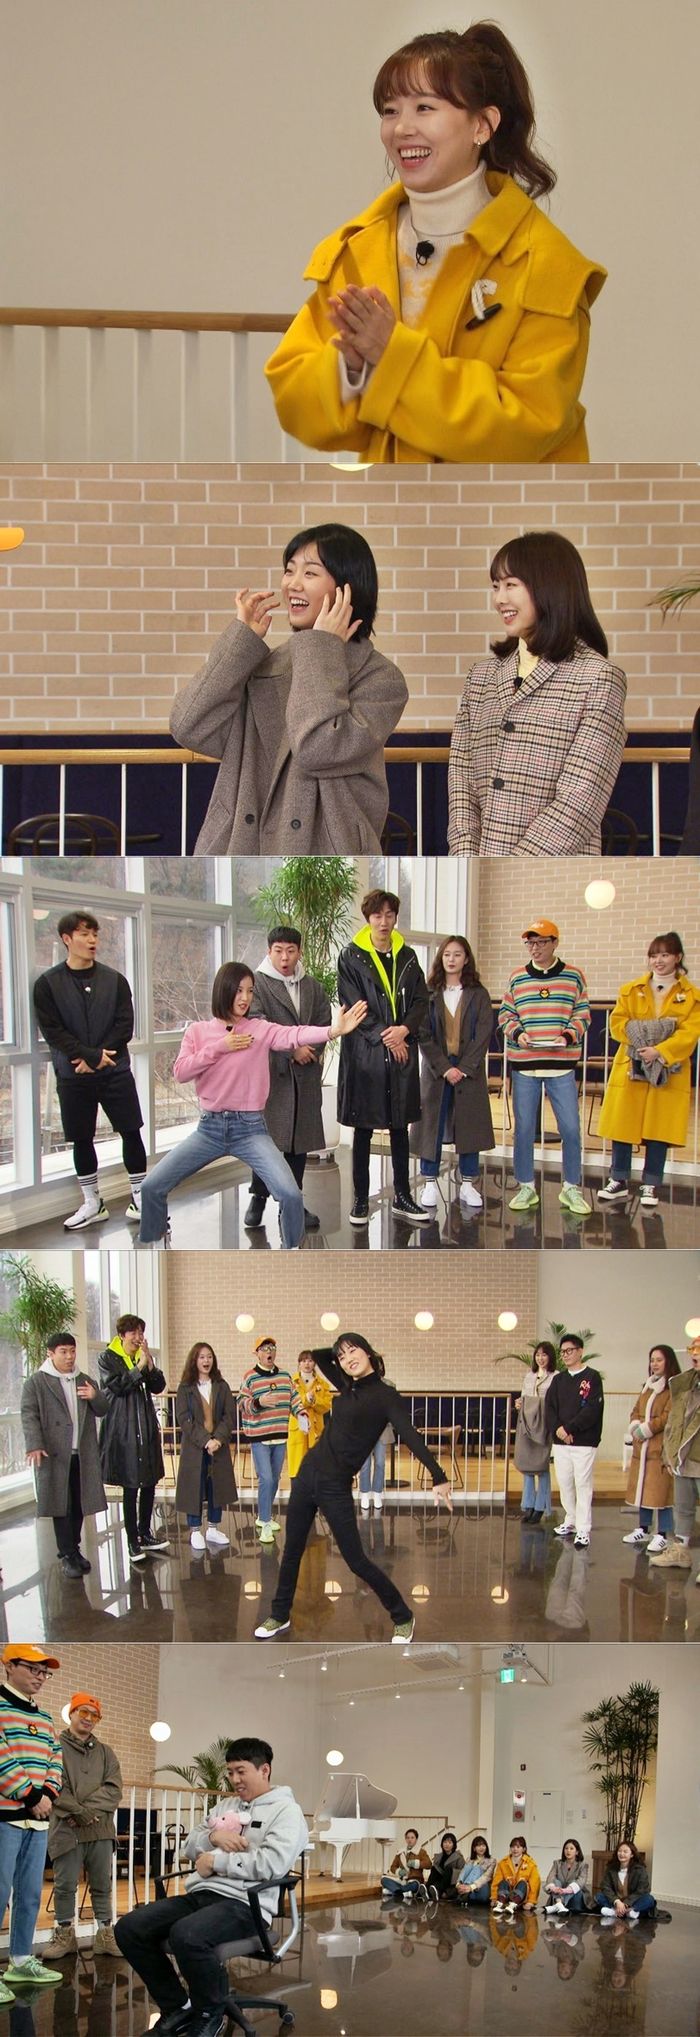 Actor Kang Han-Na, Keum Sae-rok, Lee Ju-young and Apink Park Cho-rong appear on Running Man to play Couple Race.SBS Running Man, which will be broadcasted on the 19th, is expected to be more active in 2020. Kang Han-Na, Keum Sae-rok, Lee Ju-young and Park Cho-rong appear and emit fresh charm from the opening.Keum Sae-rok said, I did not play much more because I did not have any friends among the guest at the time of appearing in Running Man last year. I want to be with a close person in this second appearance.Keum Sae-rok appeared in Running Man with Actor Lee Ju-young, who appeared in the movie Dokjeon together.Keum Sae-rok showed off his extraordinary best friend Chemie in a relaxed atmosphere as he appeared with his close sister Lee Ju-young.Lee Ju-young, who appeared in Running Man on the recommendation of Keum Sae-rok, foresaw the Running Man s Steel Serieser as a nickname of Steel Serieser in the movie.I am working hard on the sudden dance demands of the members, but I showed a strange appearance somewhere and laughed with a response of Is not the wooden doll dancing?After the Running Man 9th Anniversary Fan Meeting, Apink Park Cho-rong, who first met with the members, also revealed his ability to play a martial arts game for eight years, revealing his cute appearance and other powerful charm.In addition, Running Man Half Fixed Kang Han-Na visited Running Man in about two months and led the atmosphere with rusty entertainment feeling.Running Man, which is decorated with Couple Race with four people, will be broadcast at 5 pm on Sunday, 19th.